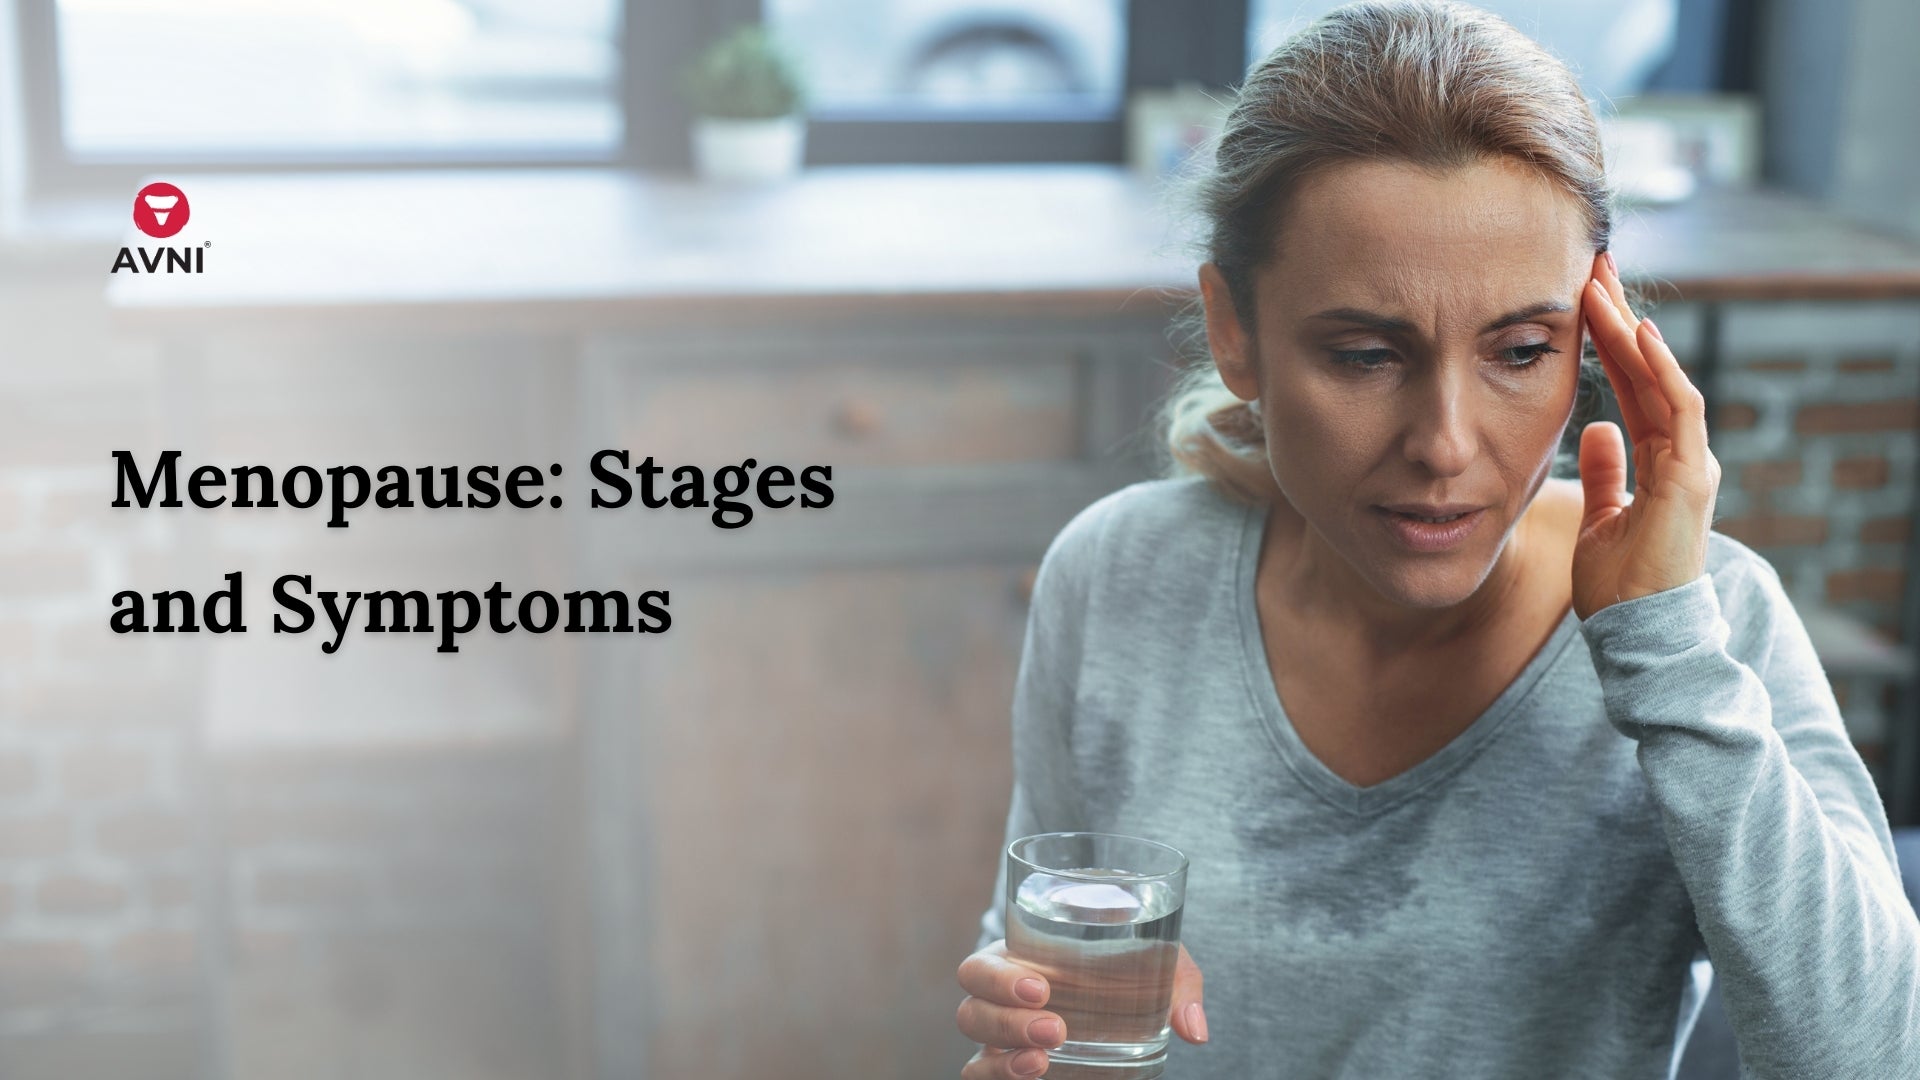 Menopause: Stages and Symptoms